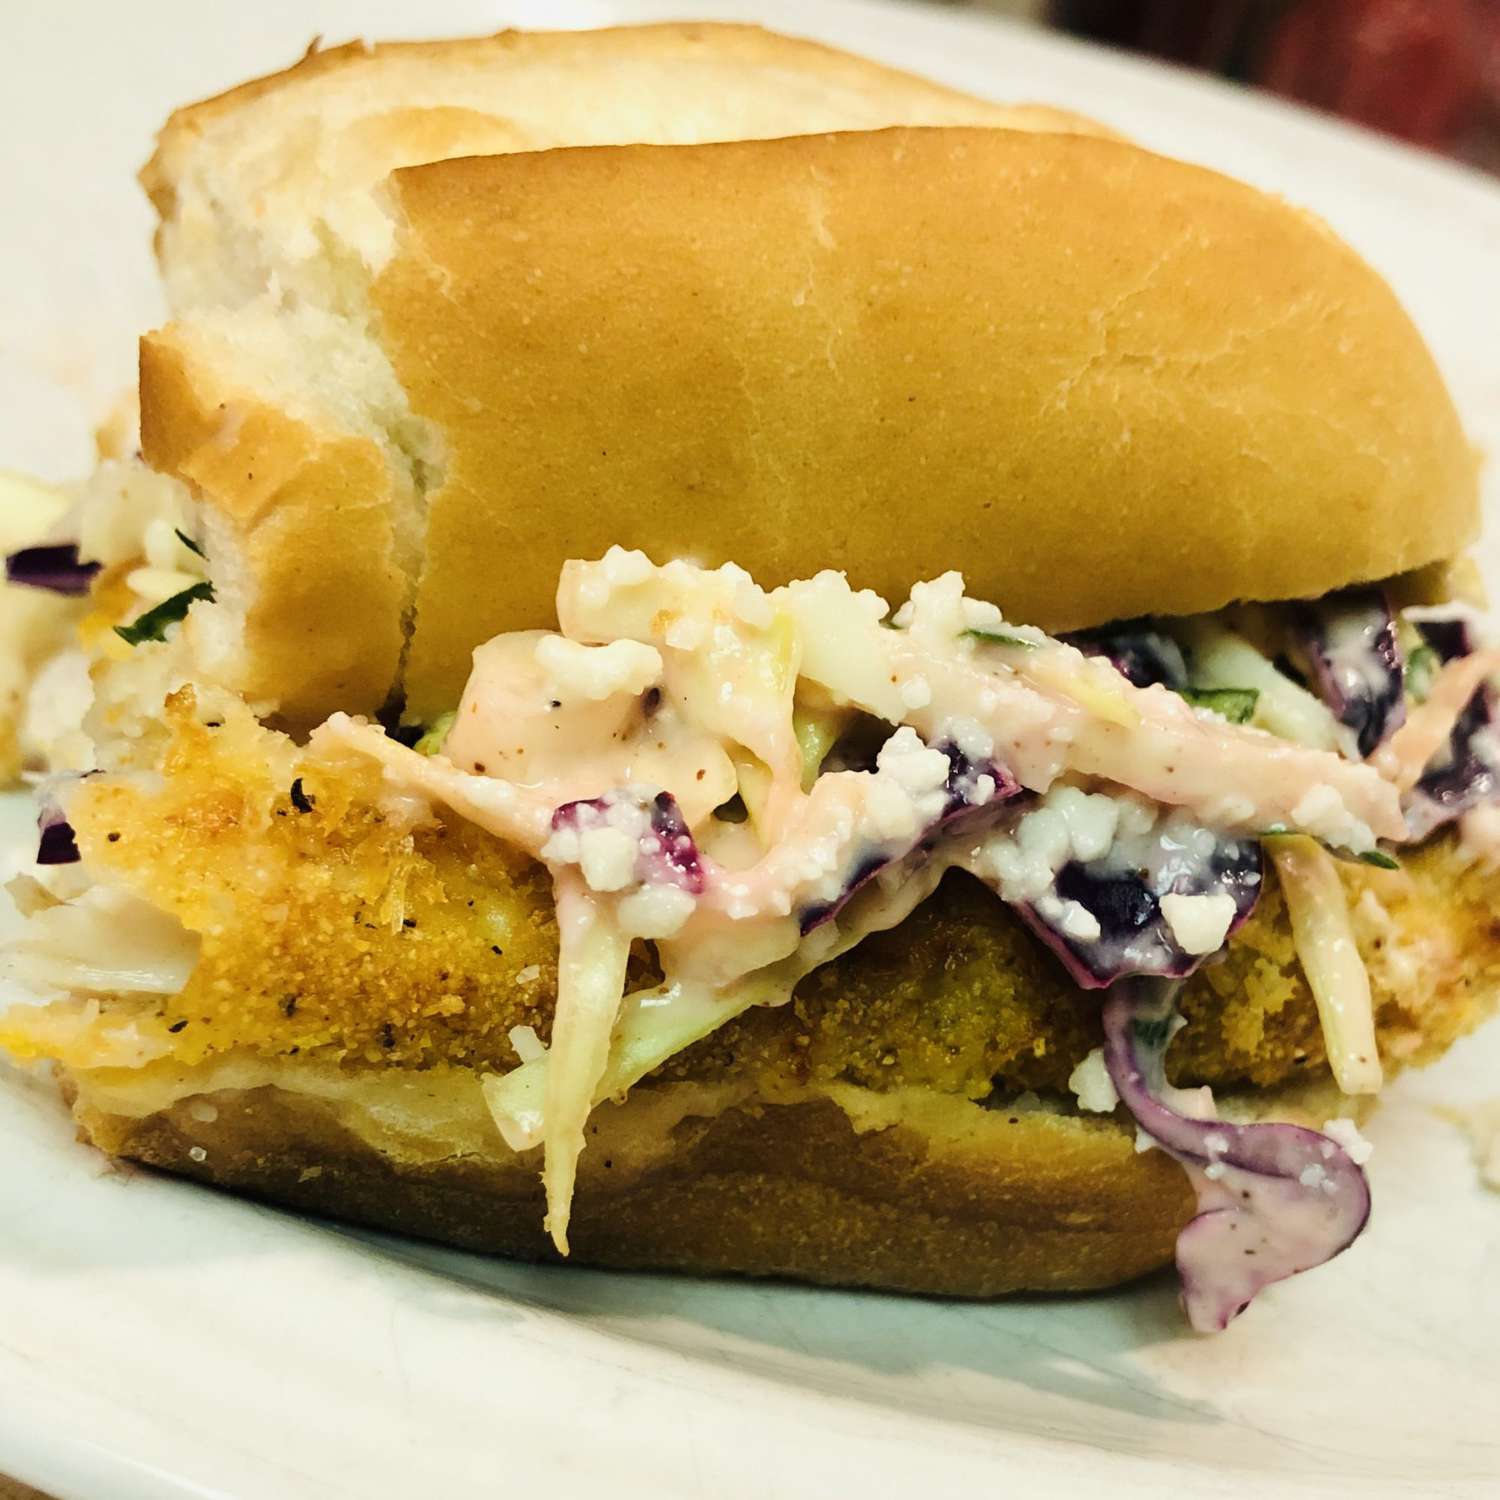 <p>"This was my first recipe to make in my new air fryer and it did not disappoint," says reviewer Mary Scott Krekeler. "I love that there was no grease to clean up off my stove top. The cod turned out wonderful and loved the slaw. We did have to add a bit more hot sauce but that's because my husband and I like spicy food. I will definitely make this again."</p>
                          